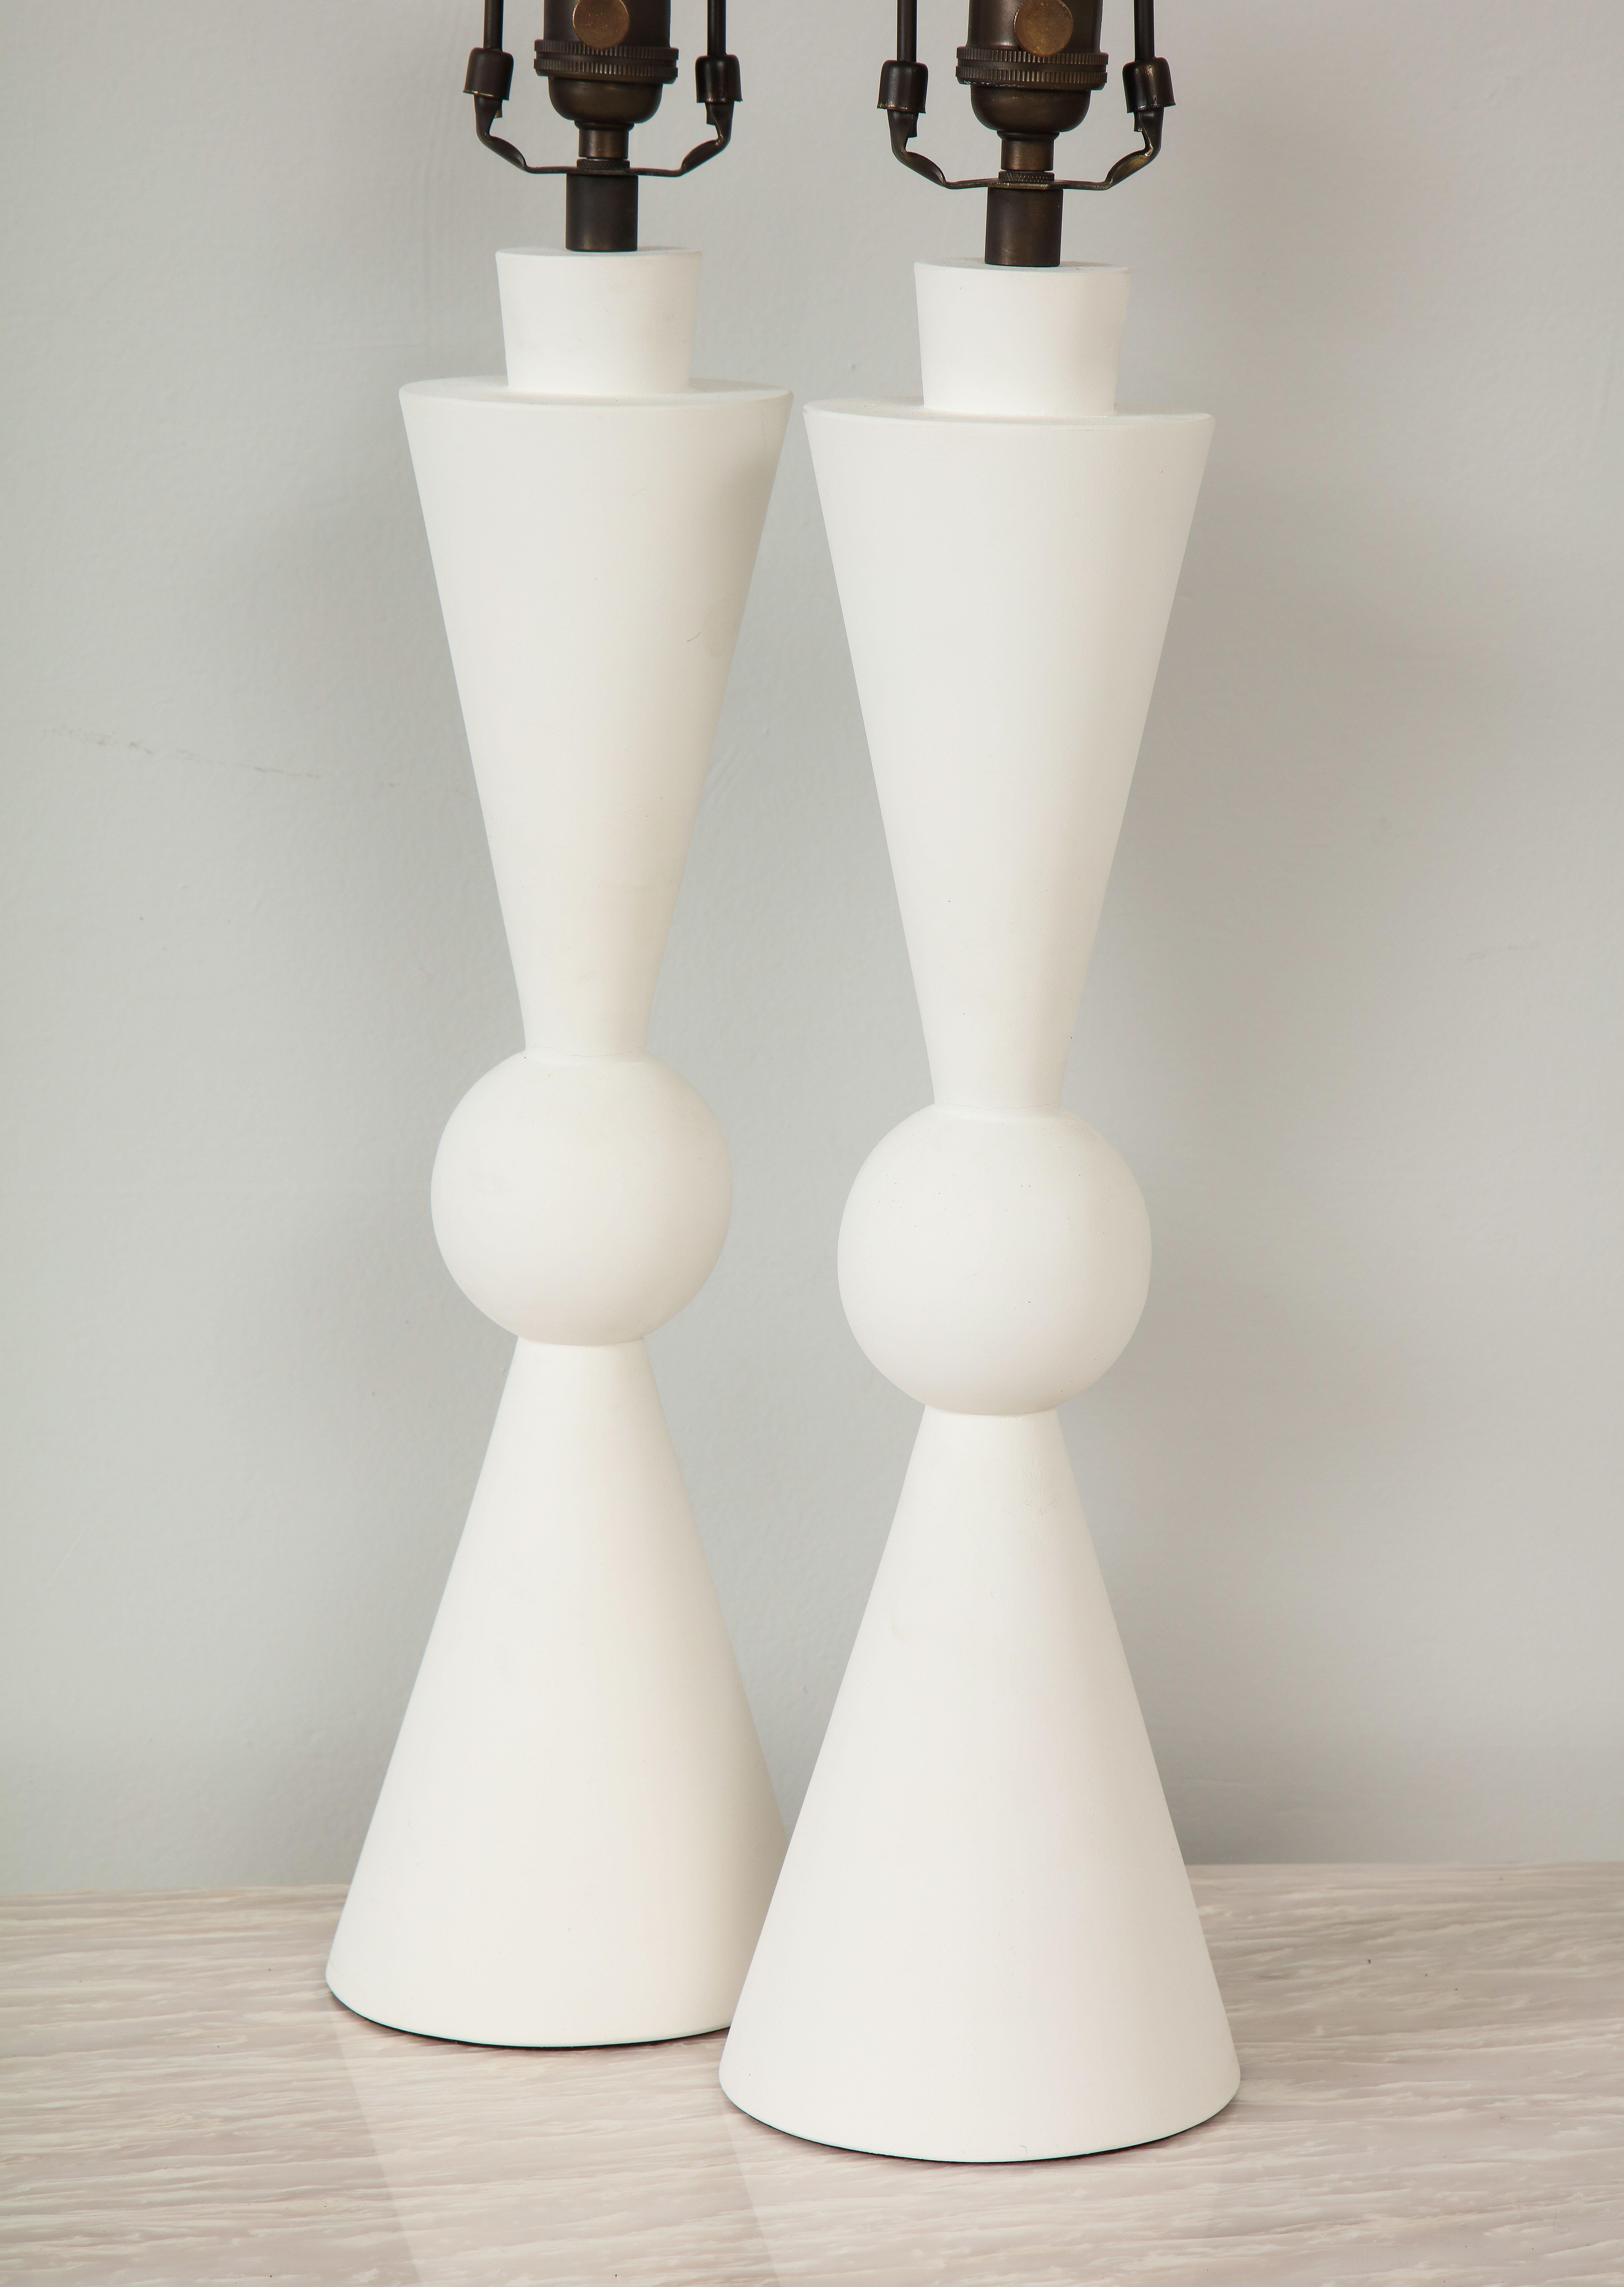 American Pair of Hand Crafted Custom Plaster Arlo Table Lamps For Sale